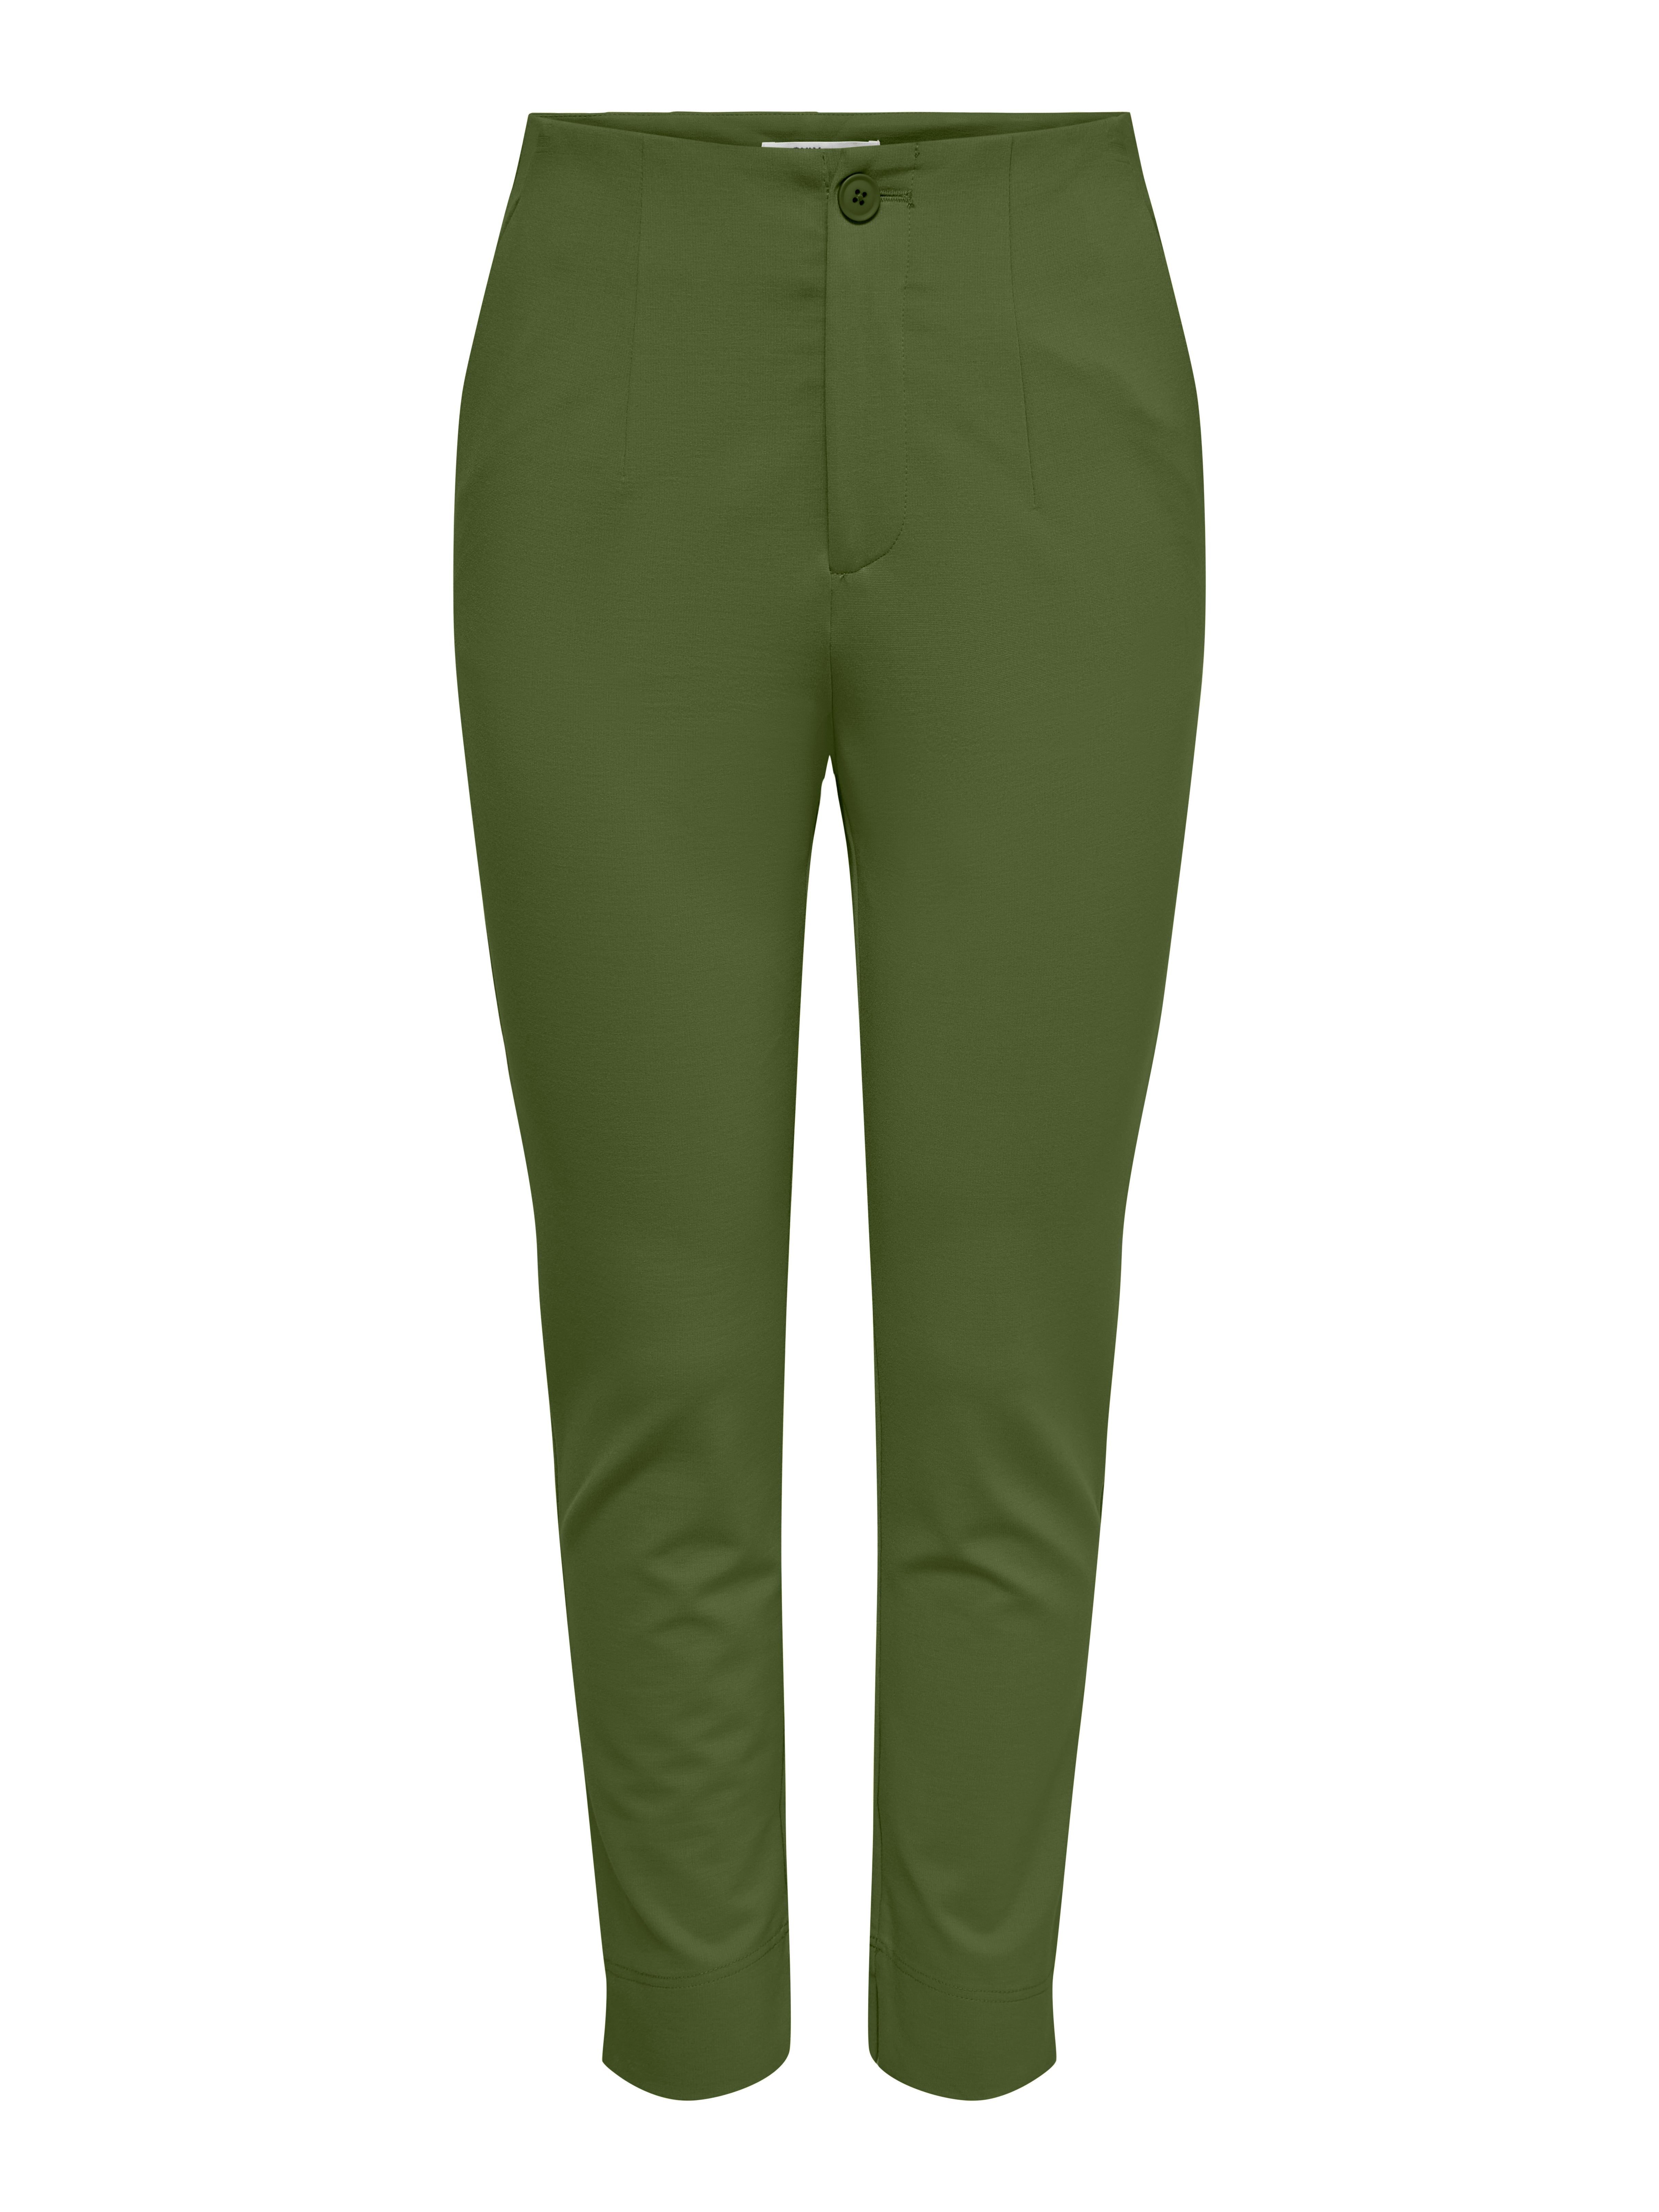 Slim fit cigarette Trousers with 50% discount!